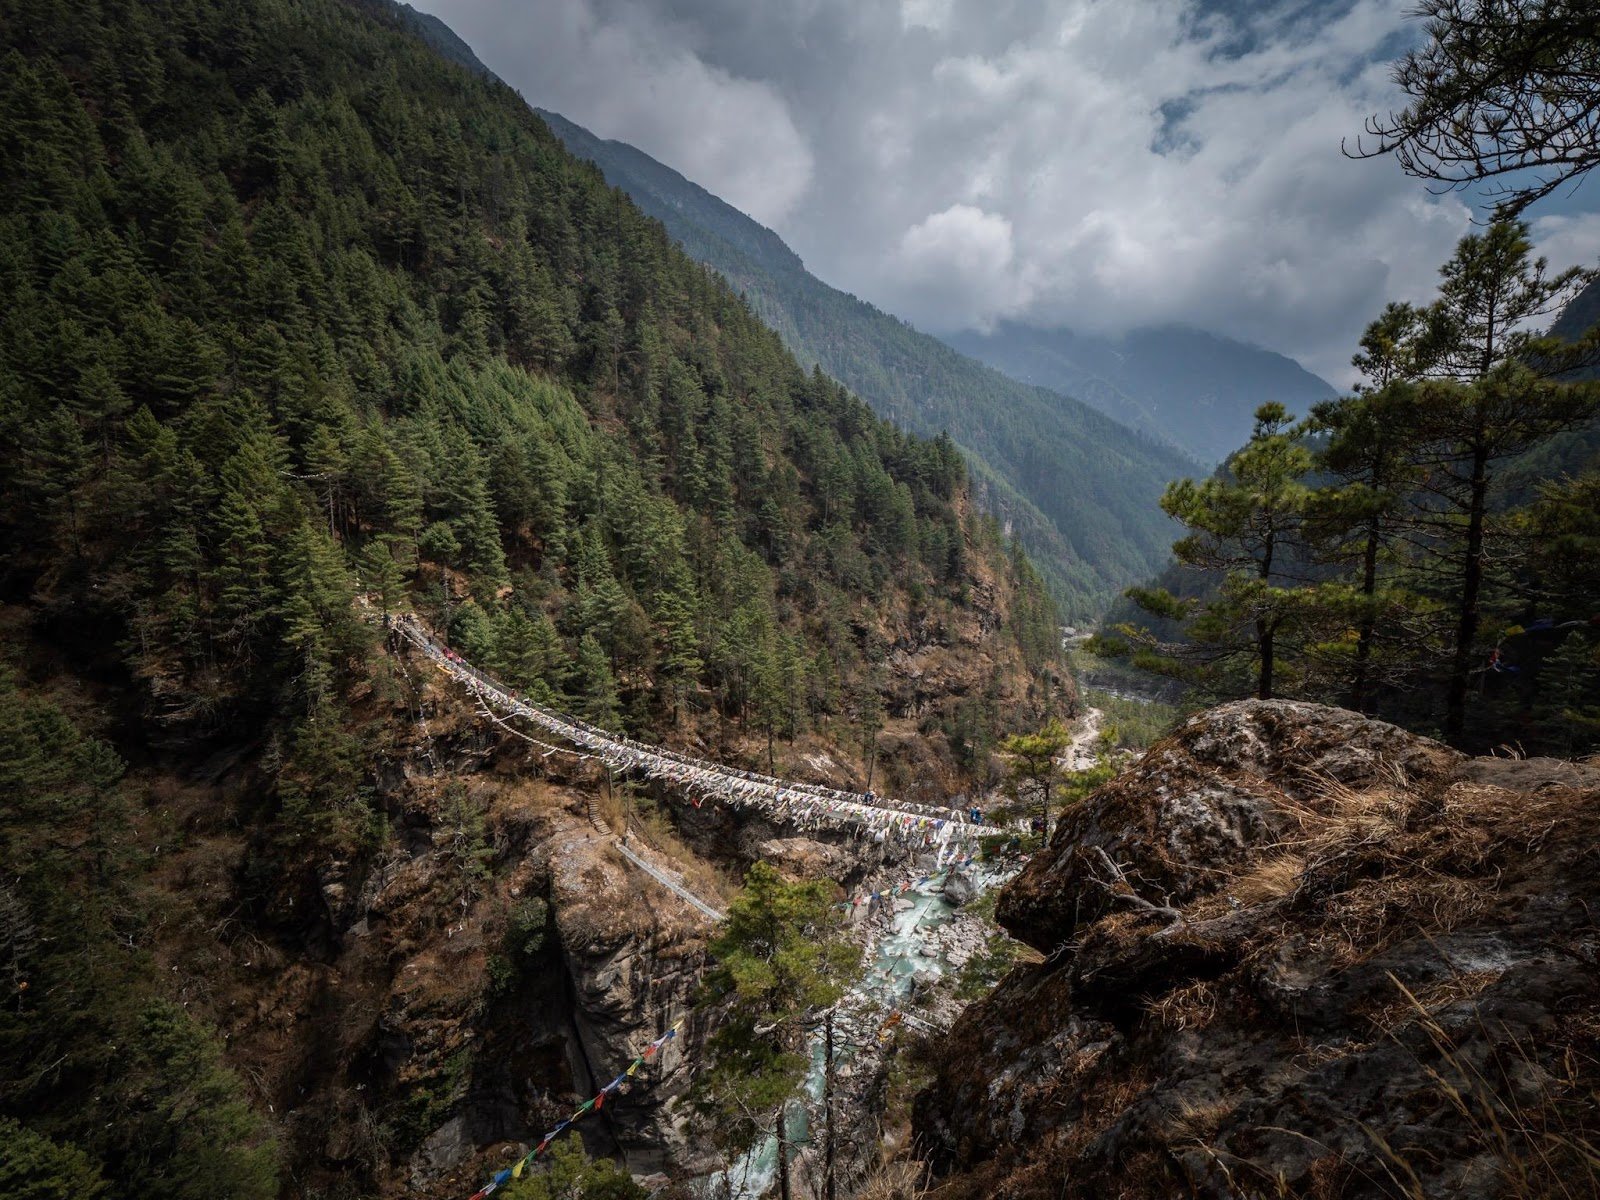 A suspension bridge in the Nepal Himalayas, stretching over a glacial river.